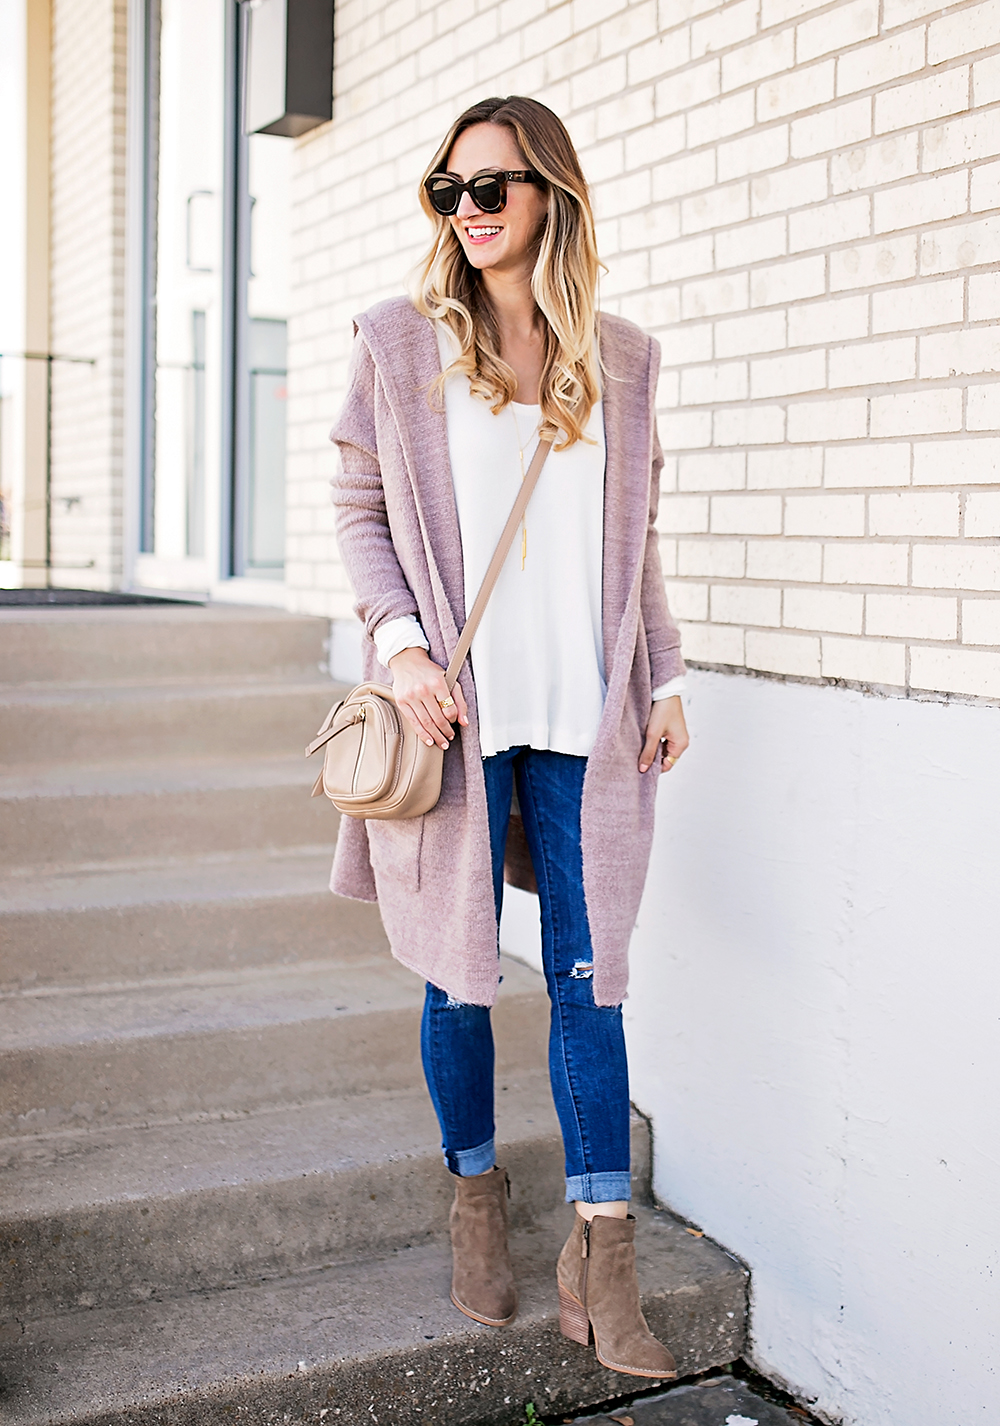 livvyland-blog-olivia-watson-blush-pink-dusty-rose-cardigan-sweater-free-people-thermal-top-cozy-light-layers-nordstrom-fall-outfit-7